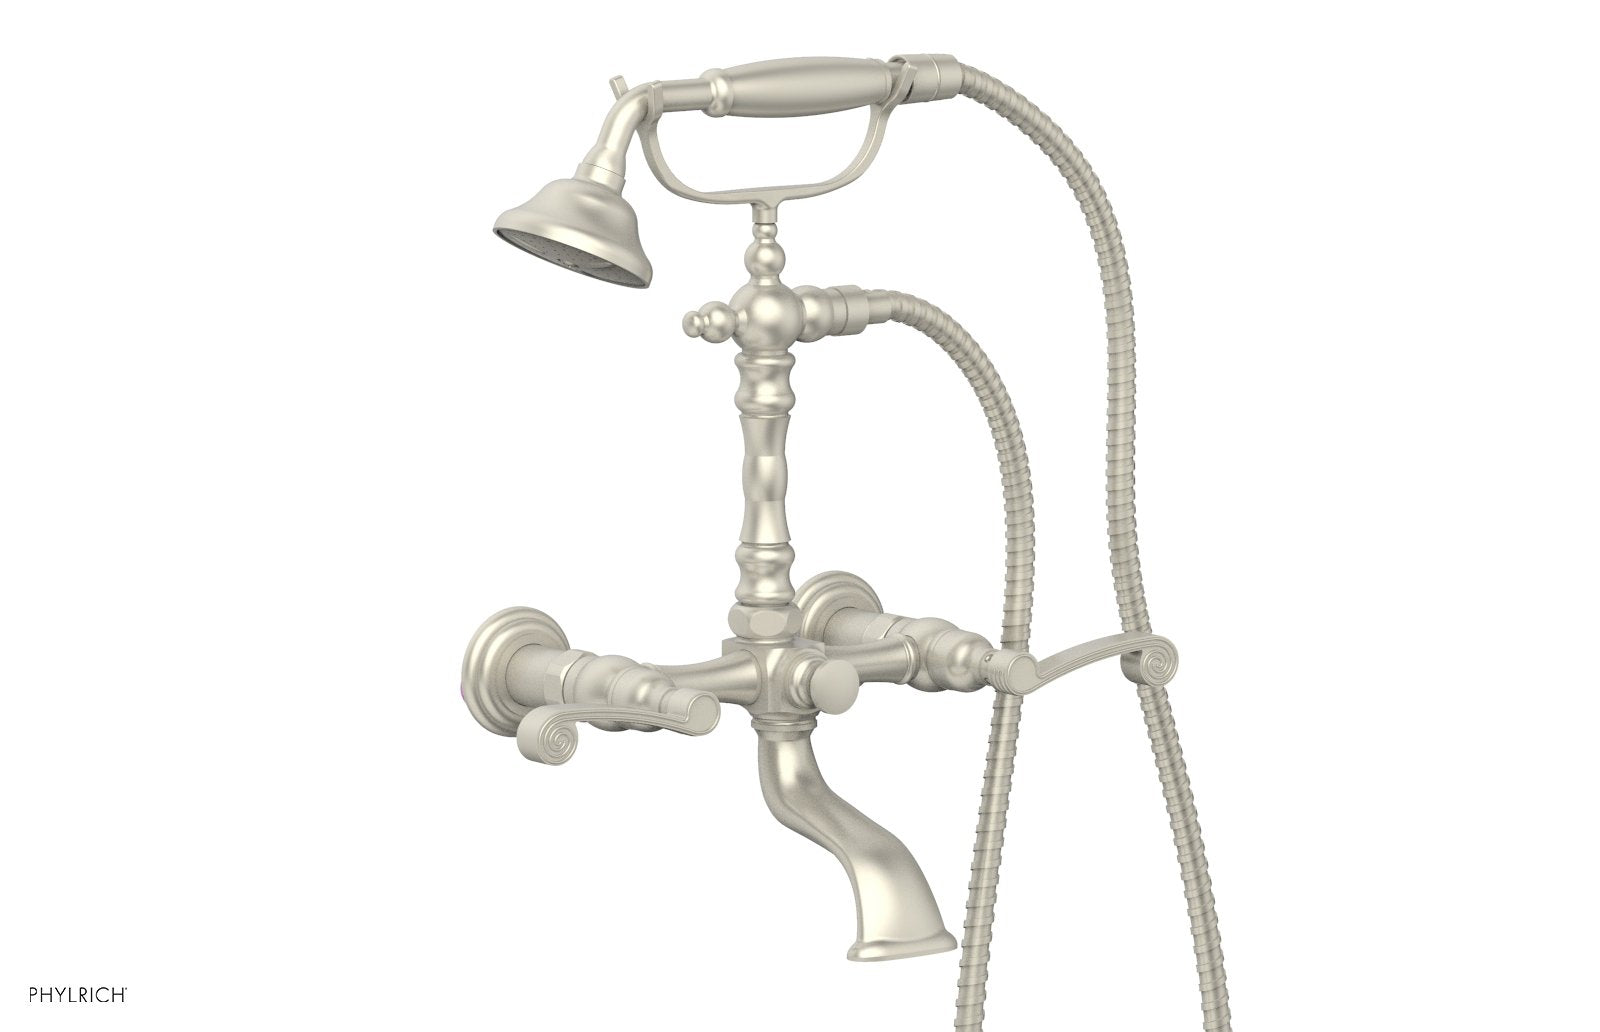 Phylrich 3RING Exposed Tub & Hand Shower